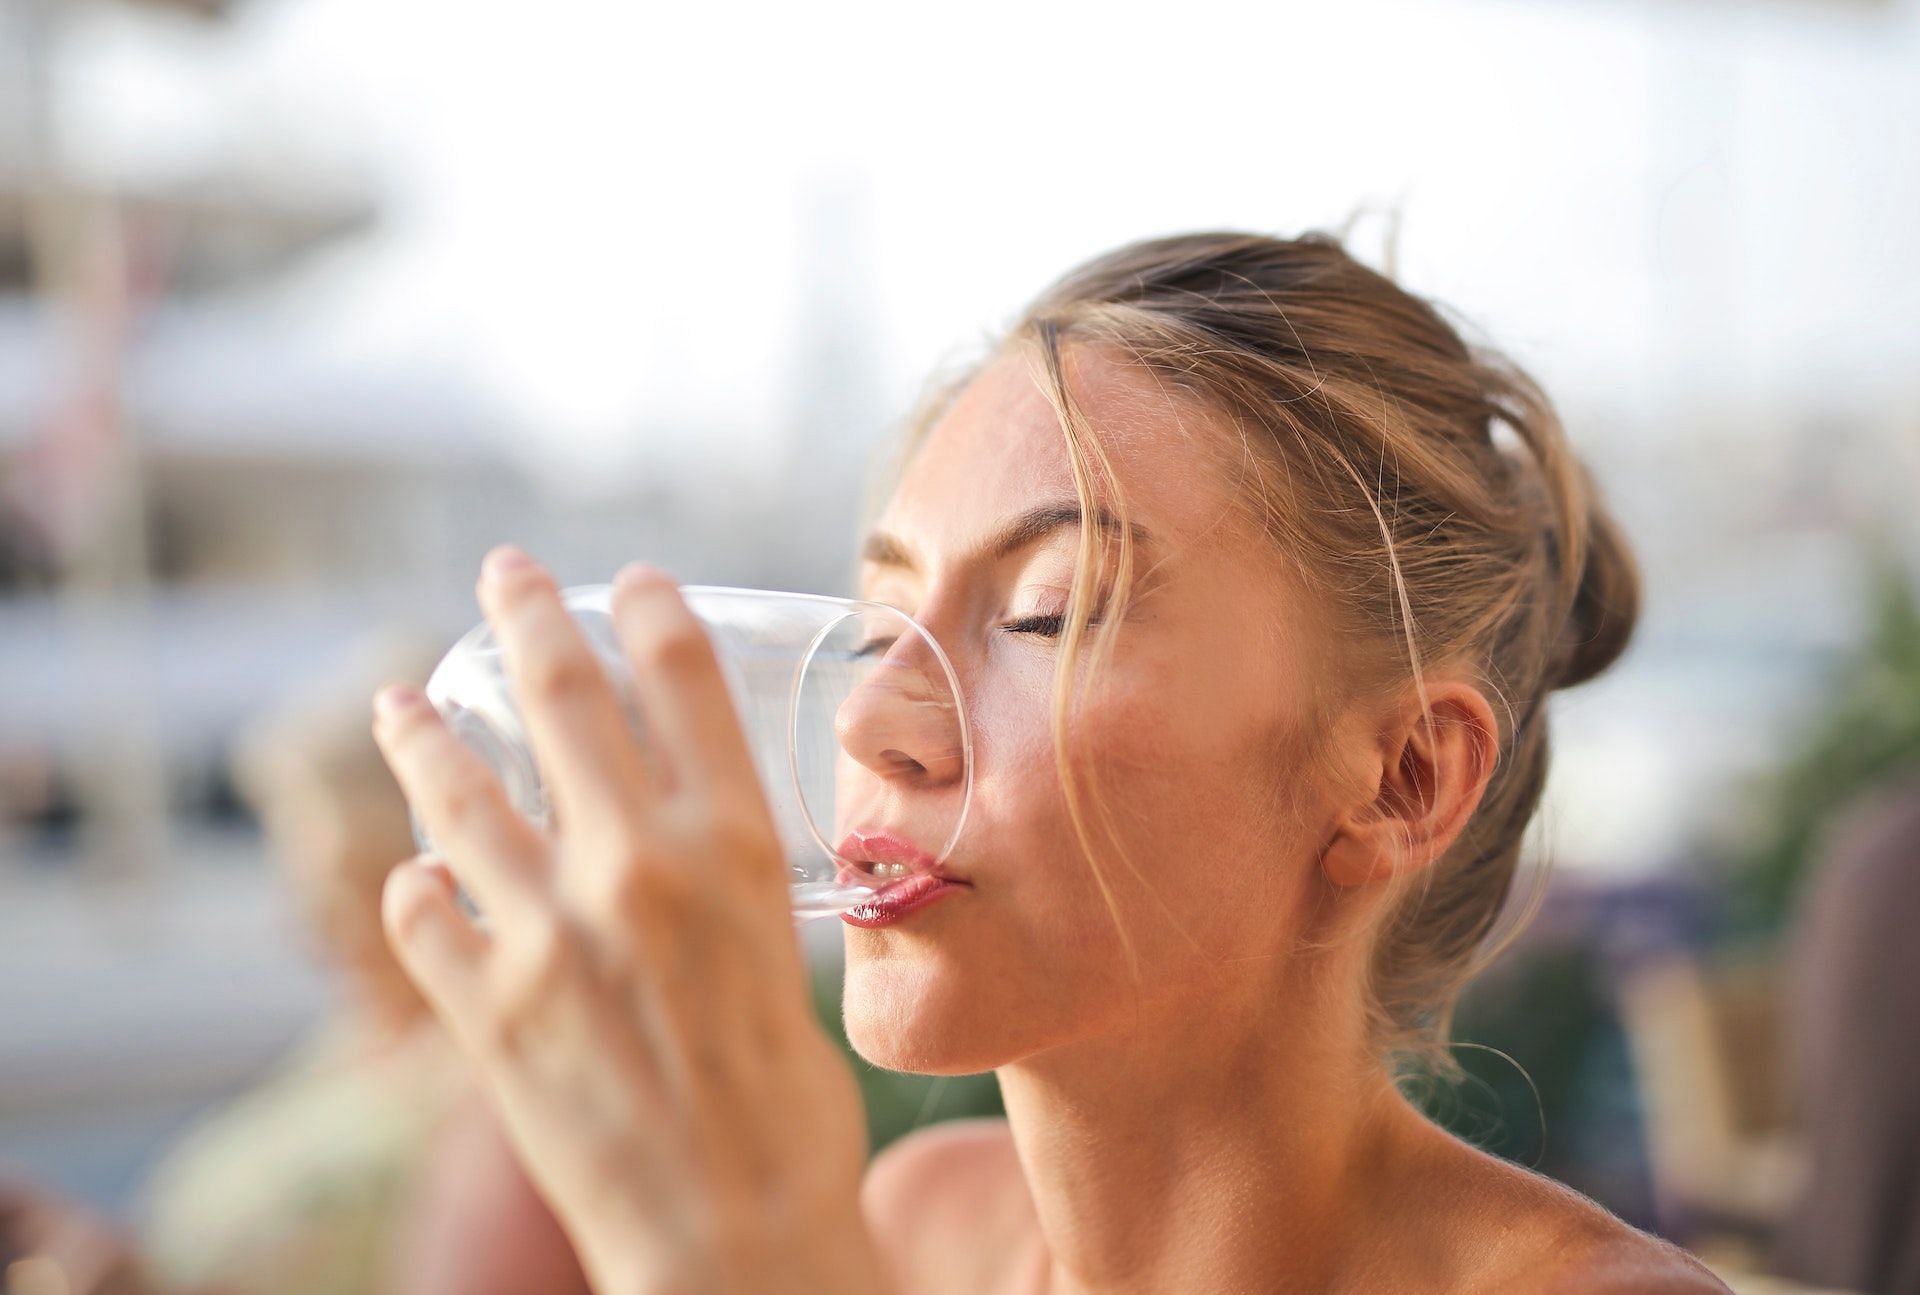 Hydration is important to keep your skin wrinkle-free and healthy. (Photo via Pexels/Adrienn)